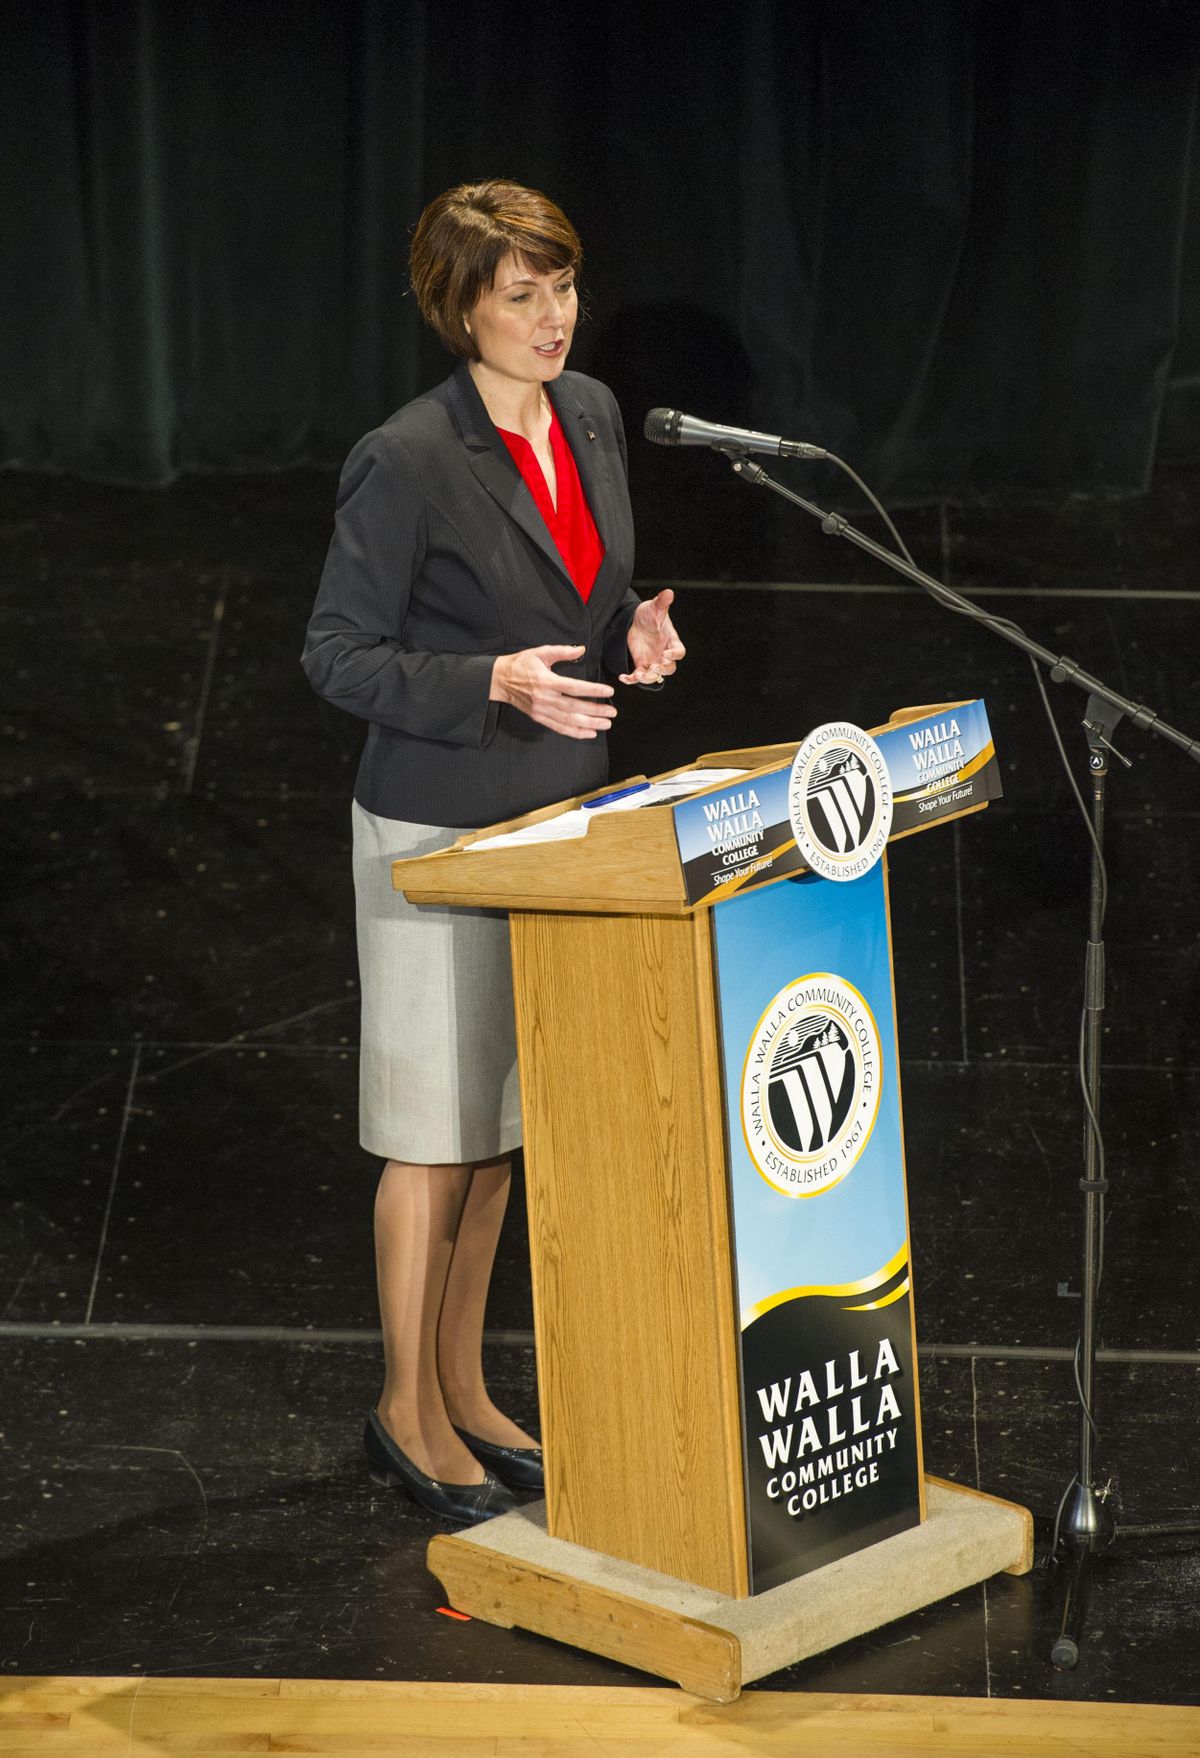 Washington State 5th Congressional District candidate Cathy McMorris-Rodgers speaks during her debate with Lisa Brown Wednesday evening, Oct 24, 2018, at Walla Walla Community College in Walla Walla, Washington. (Greg Lehman)